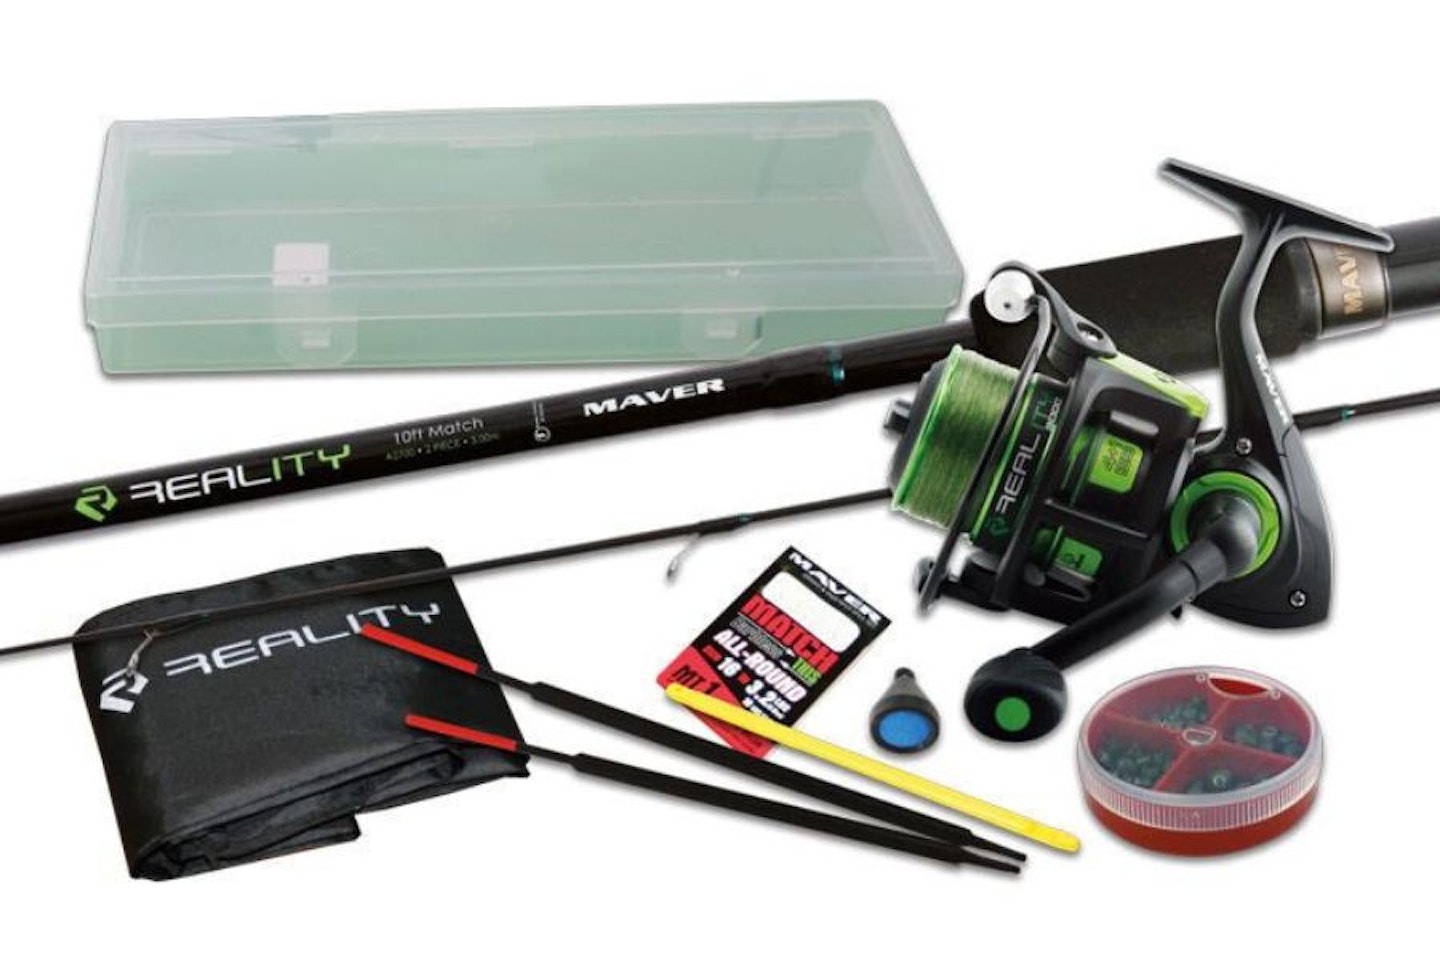 The best fishing gifts – including bundles, clothing and tackle!